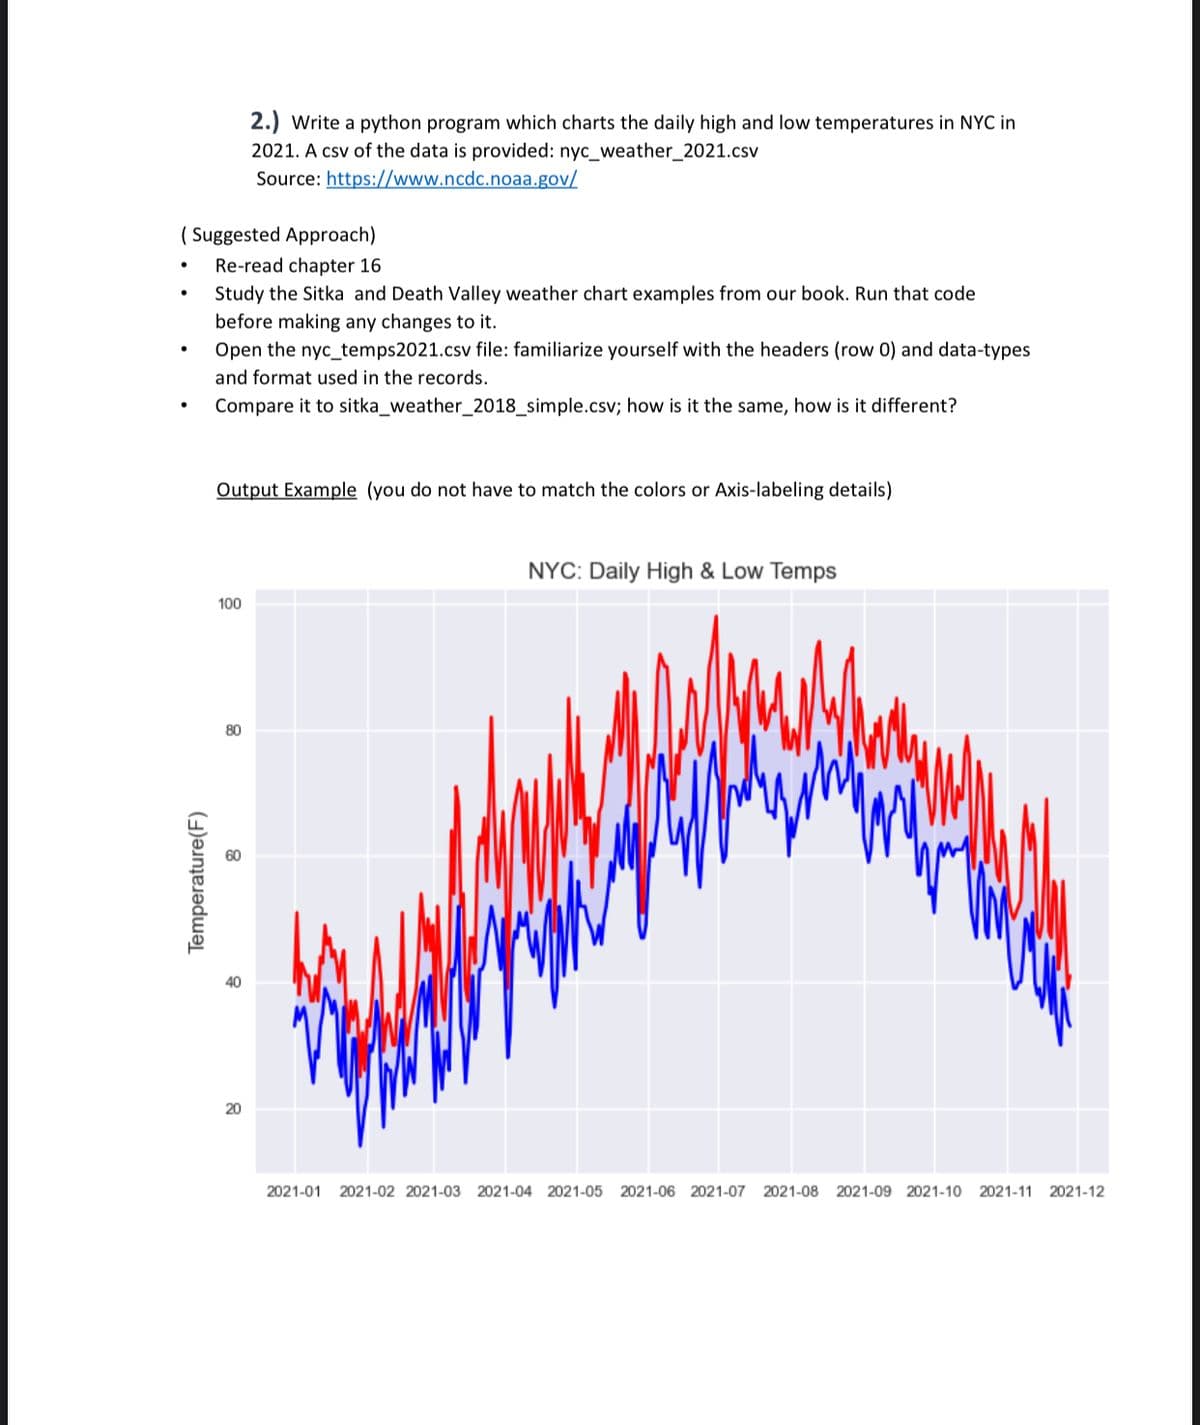 2.) Write a python program which charts the daily high and low temperatures in NYC in
2021. A csv of the data is provided: nyc_weather_2021.csv
Source: https://www.ncdc.noaa.gov/
( Suggested Approach)
Re-read chapter 16
Study the Sitka and Death Valley weather chart examples from our book. Run that code
before making any changes to it.
Open the nyc_temps2021.csv file: familiarize yourself with the headers (row 0) and data-types
and format used in the records.
Compare it to sitka_weather_2018_simple.csv; how is it the same, how is it different?
Output Example (you do not have to match the colors or Axis-labeling details)
NYC: Daily High & Low Temps
100
80
20
2021-01
2021-02 2021-03 2021-04 2021-05 2021-06 2021-07 2021-08
2021-09 2021-10
2021-11 2021-12
Temperature(F)
